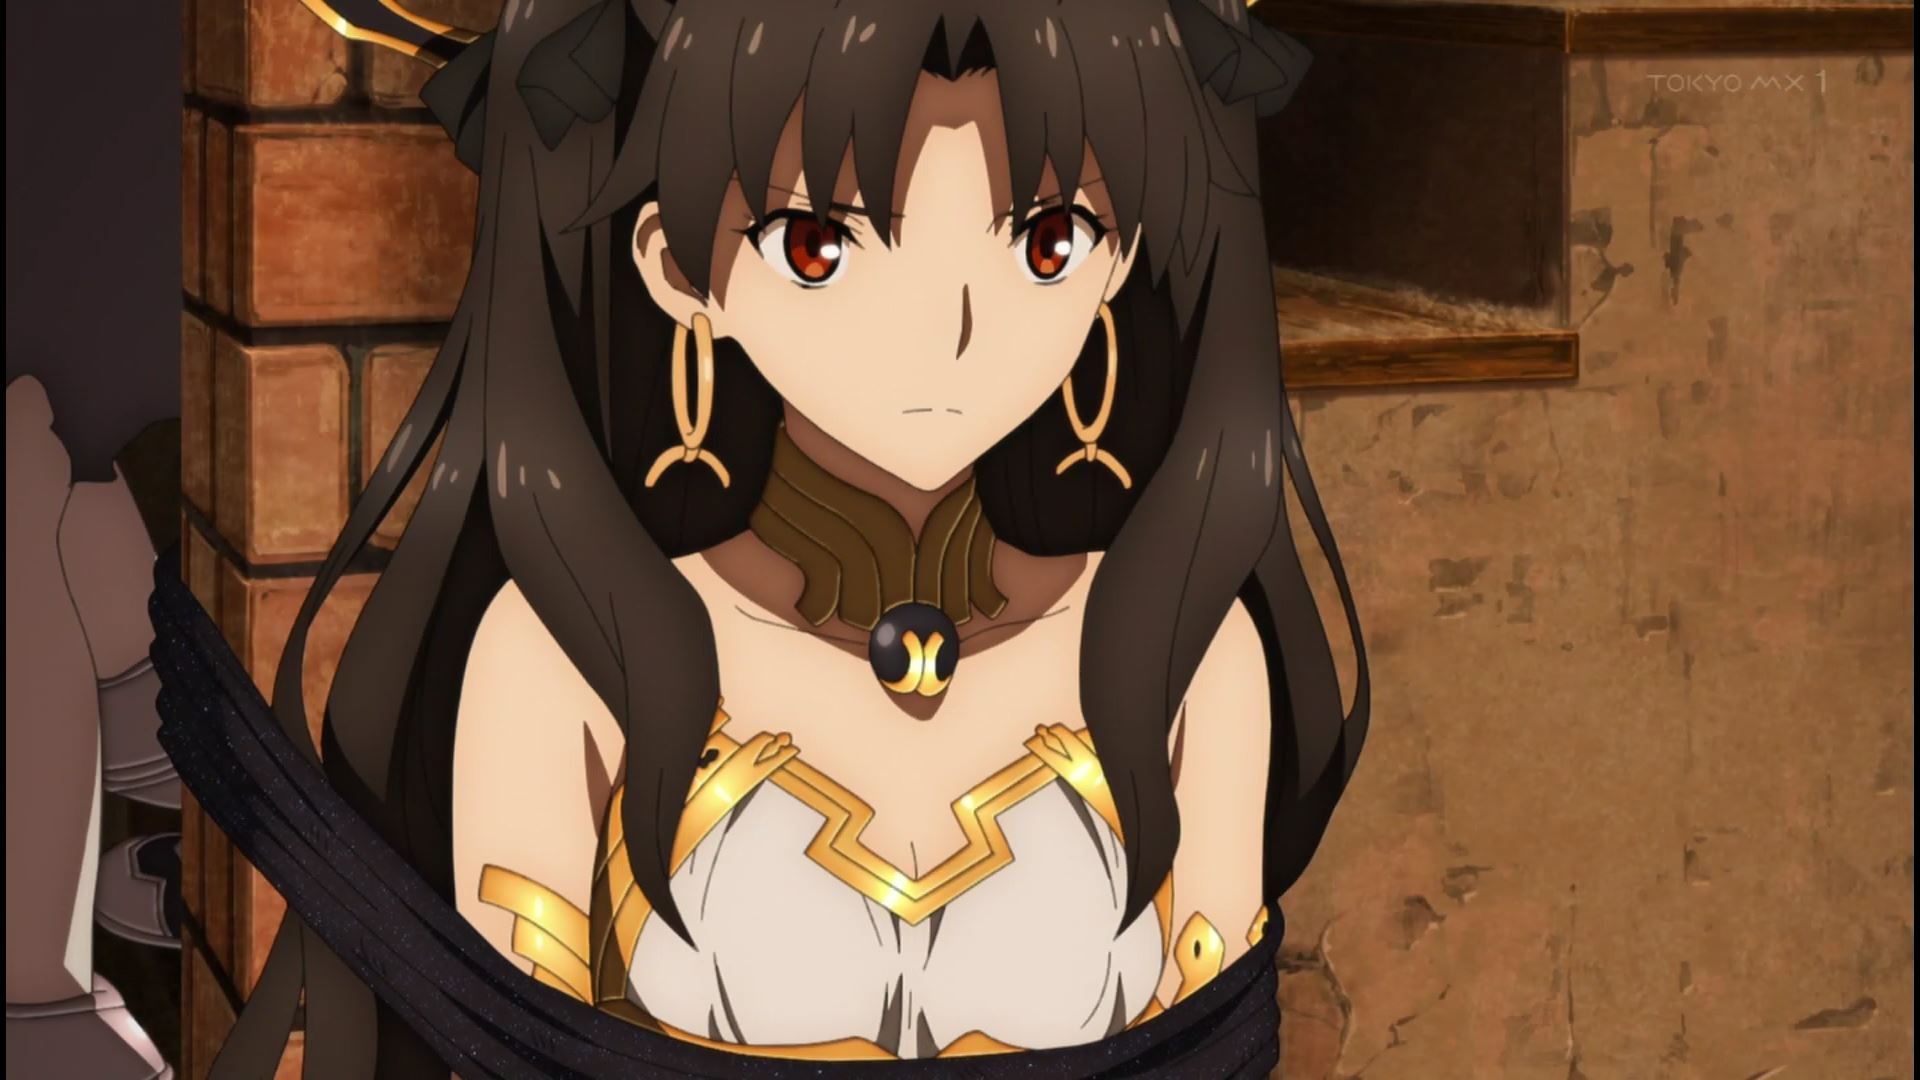 Anime [Fate / Grand Order Babylonia] 6 episodes such as Eleshkigar and Ishtar's naked figure 18